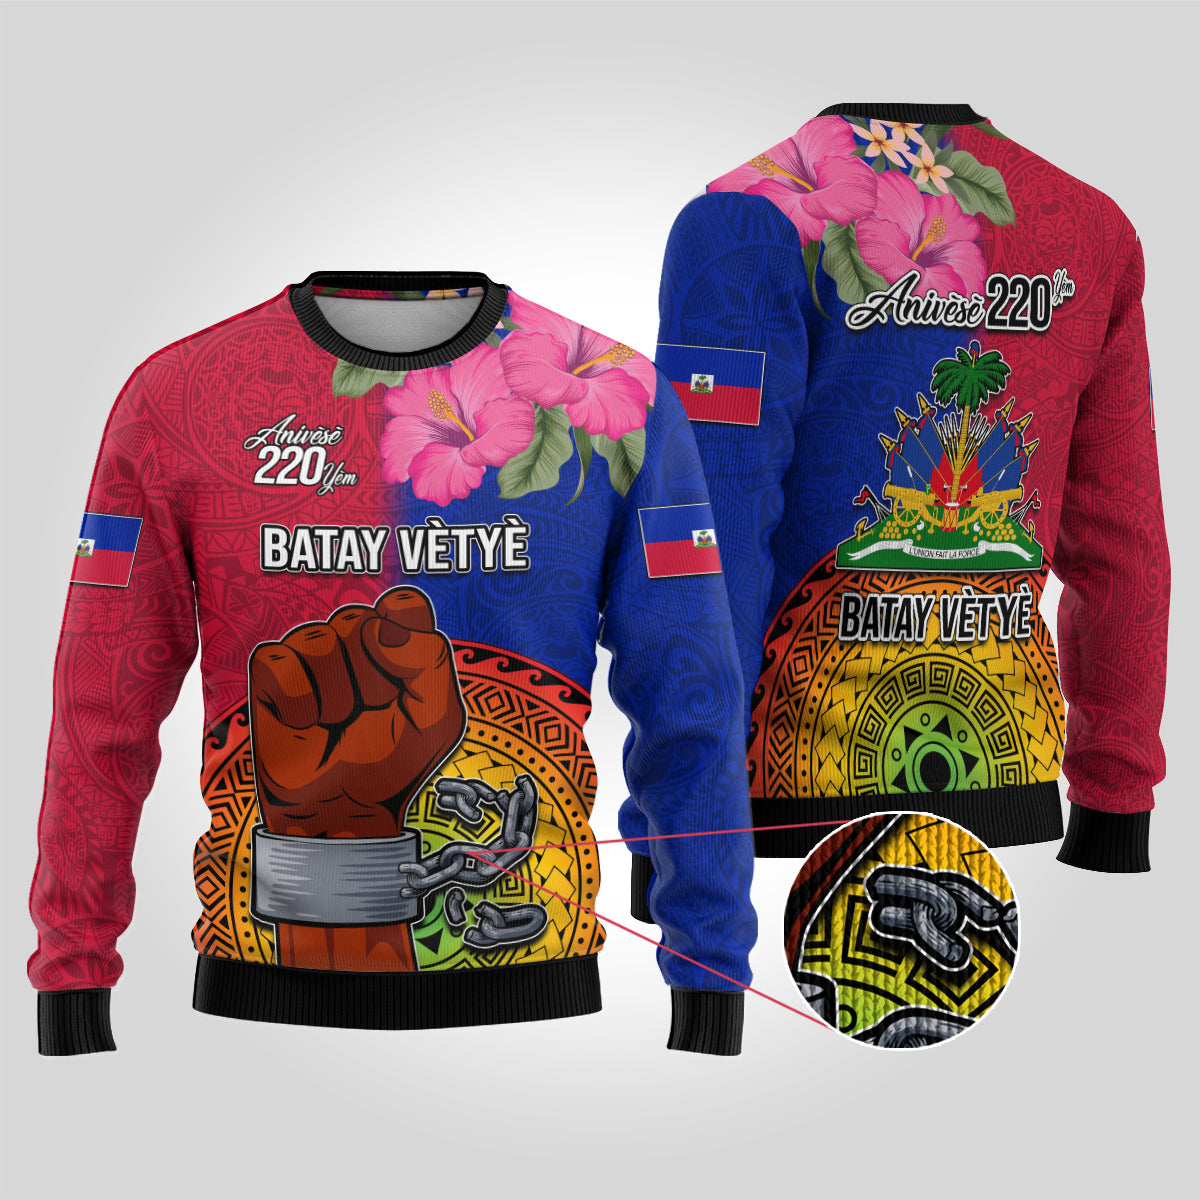 Haiti Battle of Vertieres Ugly Christmas Sweater The Haitian Revolution 220th Anniversary LT03 Red - Polynesian Pride